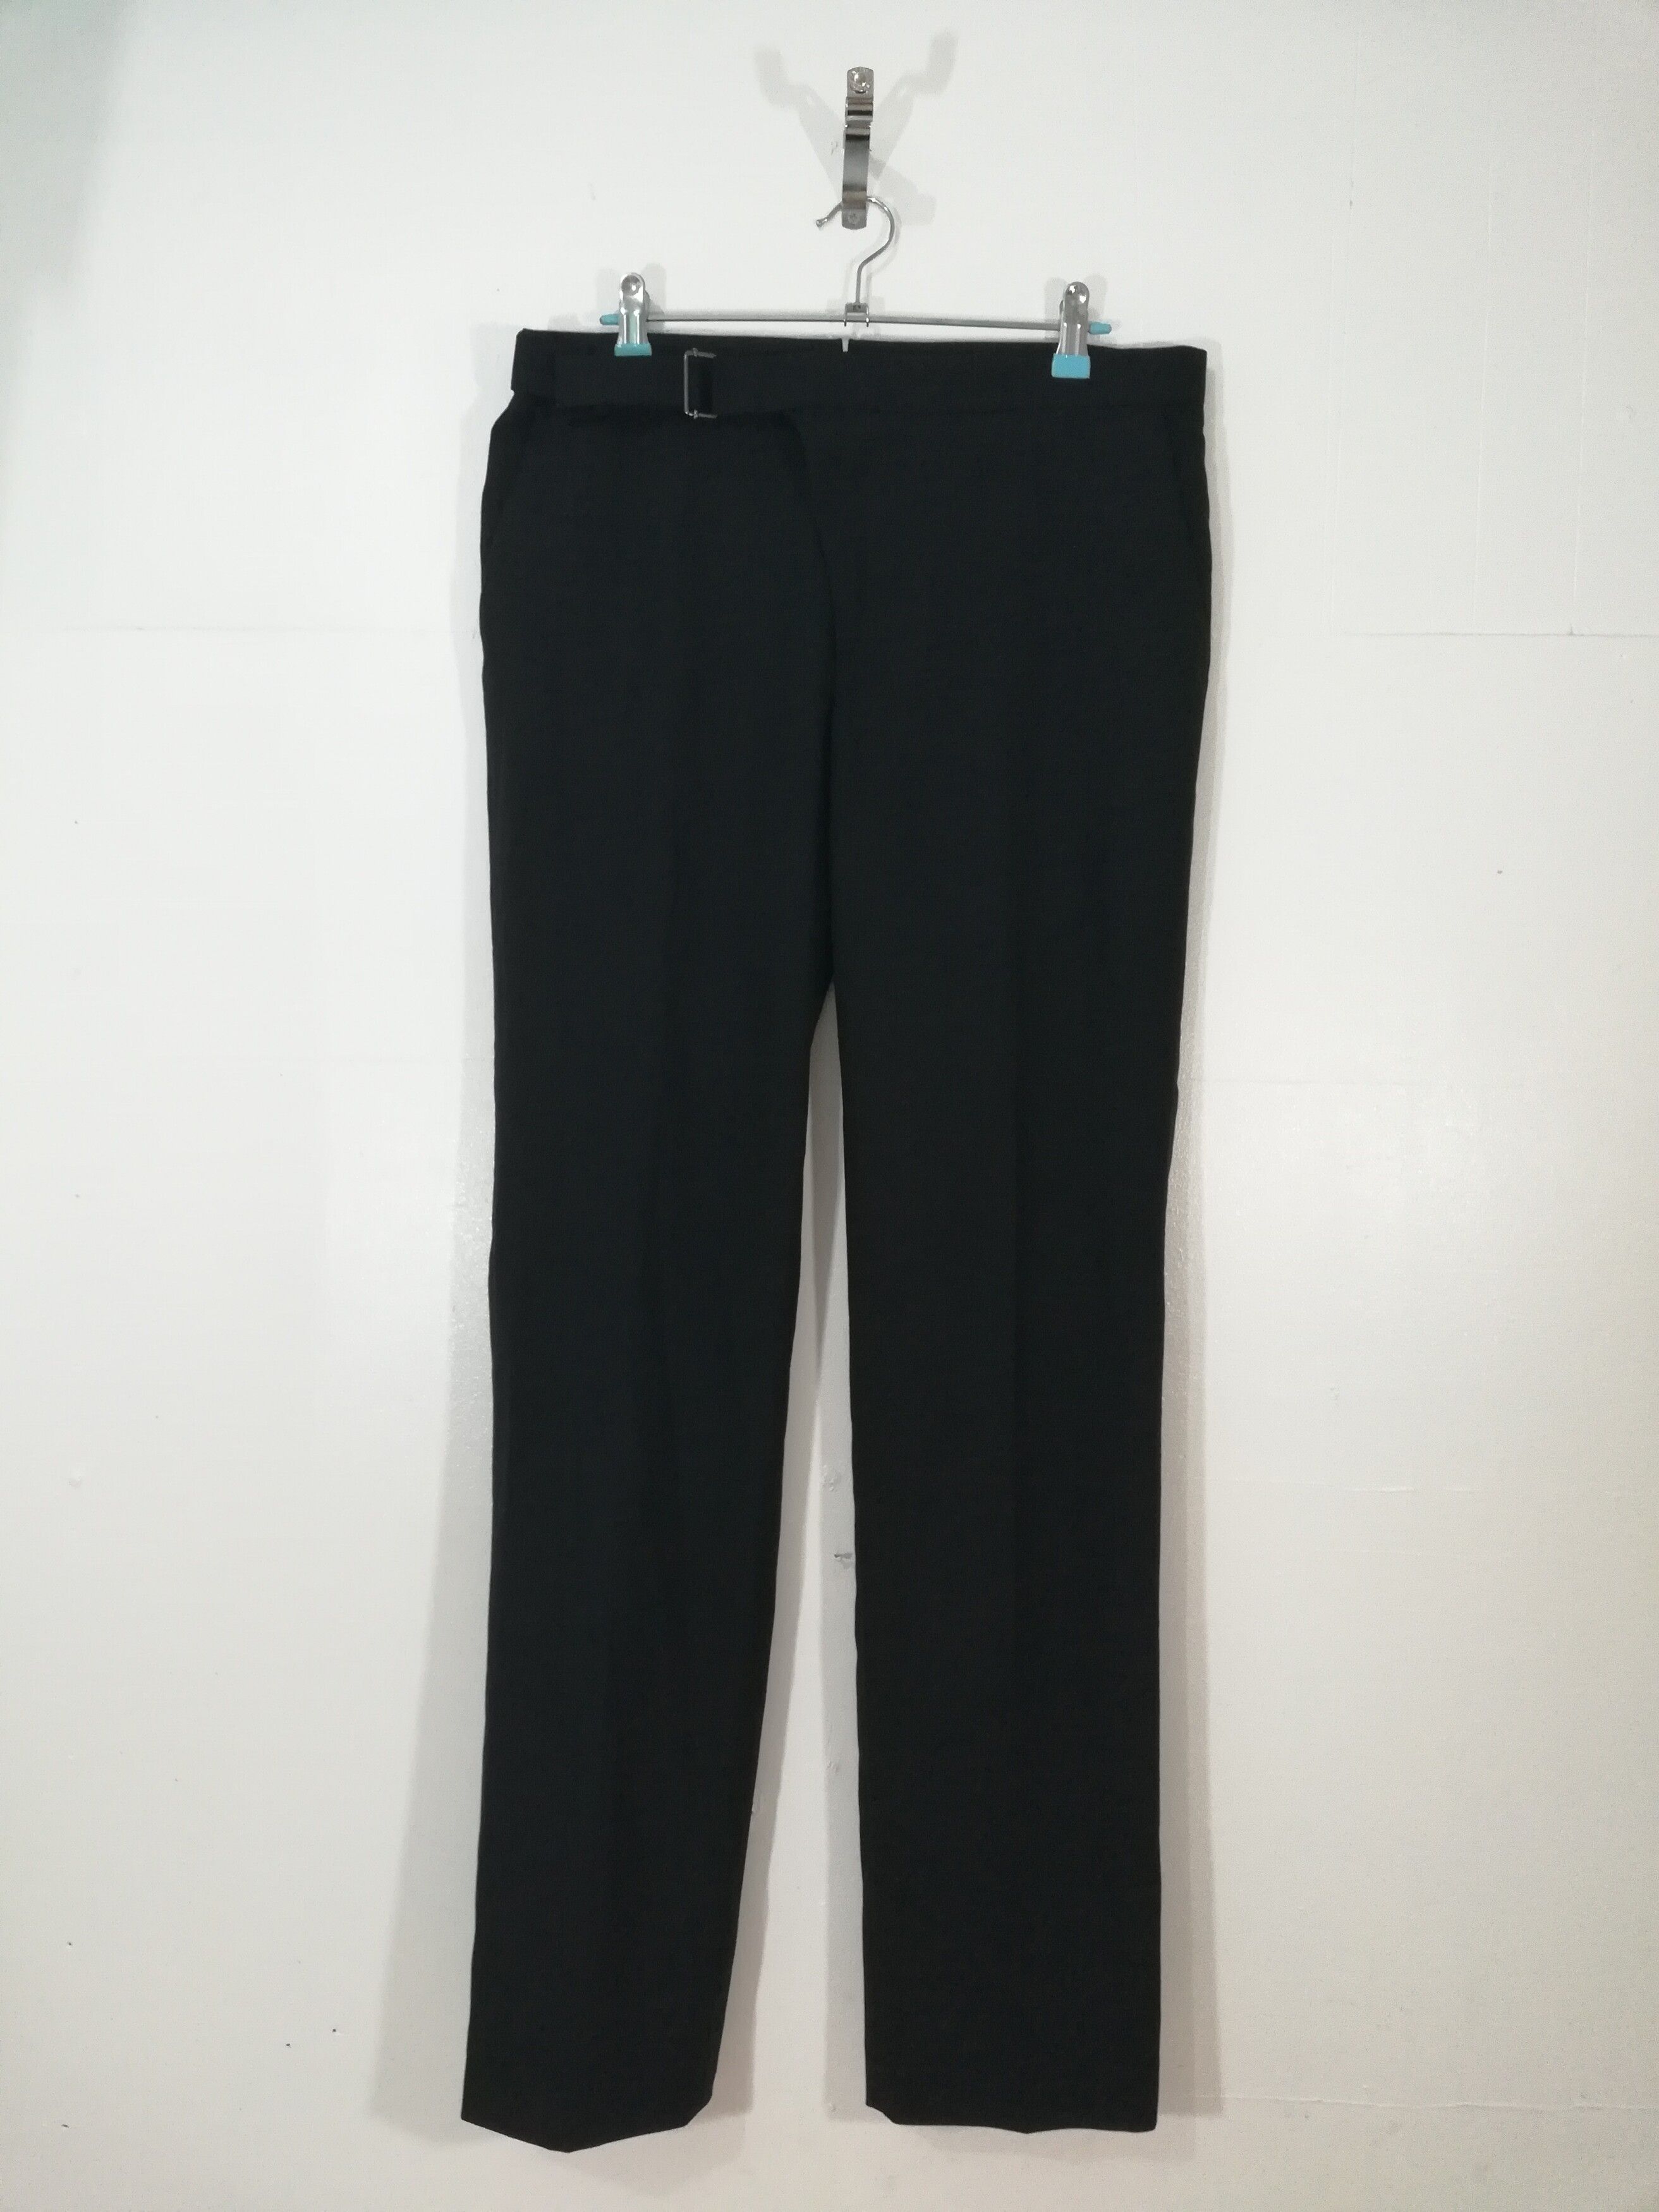 AW09 "Mirror" Runway Belted Wool Trousers - 2